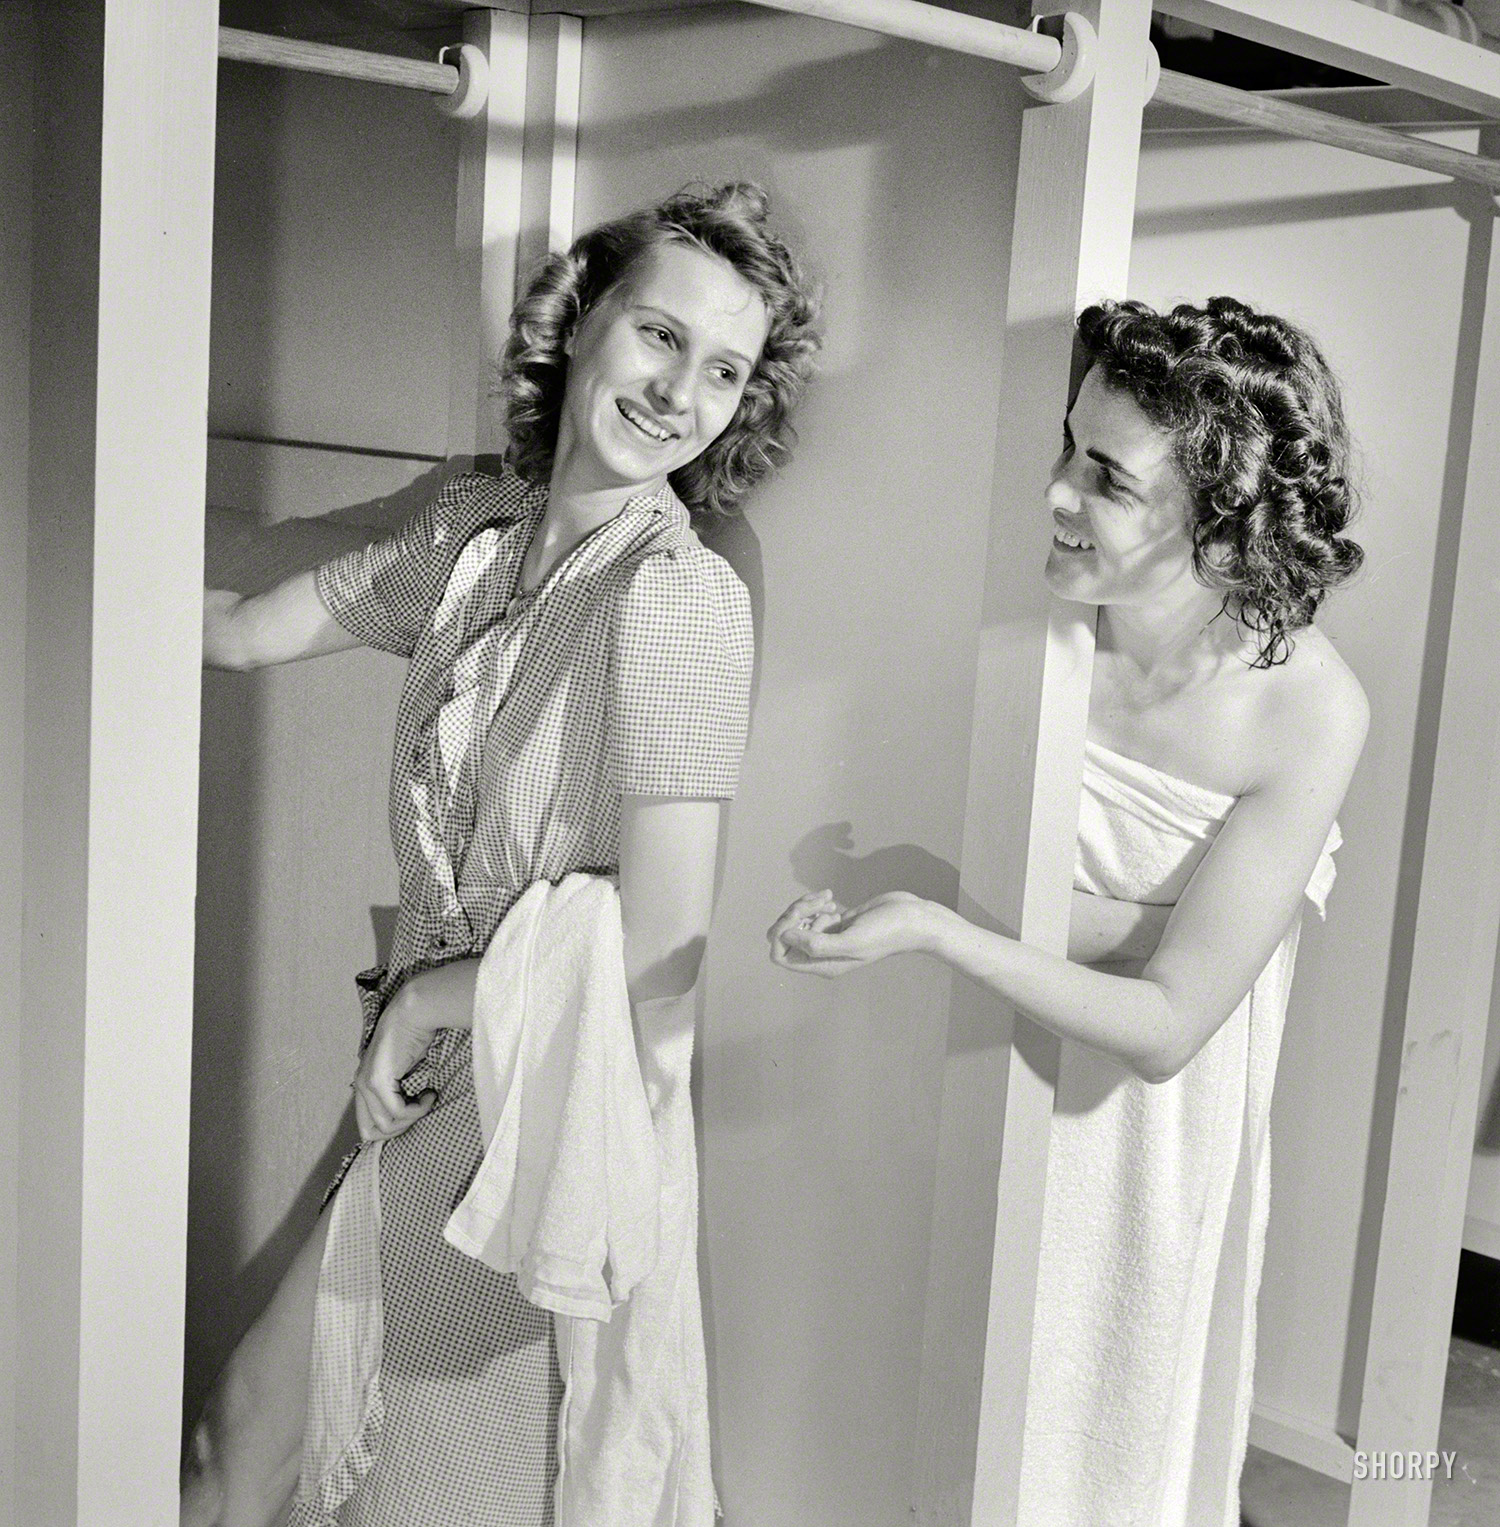 June 1943. "Arlington, Virginia. Girls in two of the long line of showers at Idaho Hall, Arlington Farms, suburban Washington residence for women who work in the U.S. government for the duration of the war." Medium format negative by Esther Bubley for the Office of War Information. View full size.